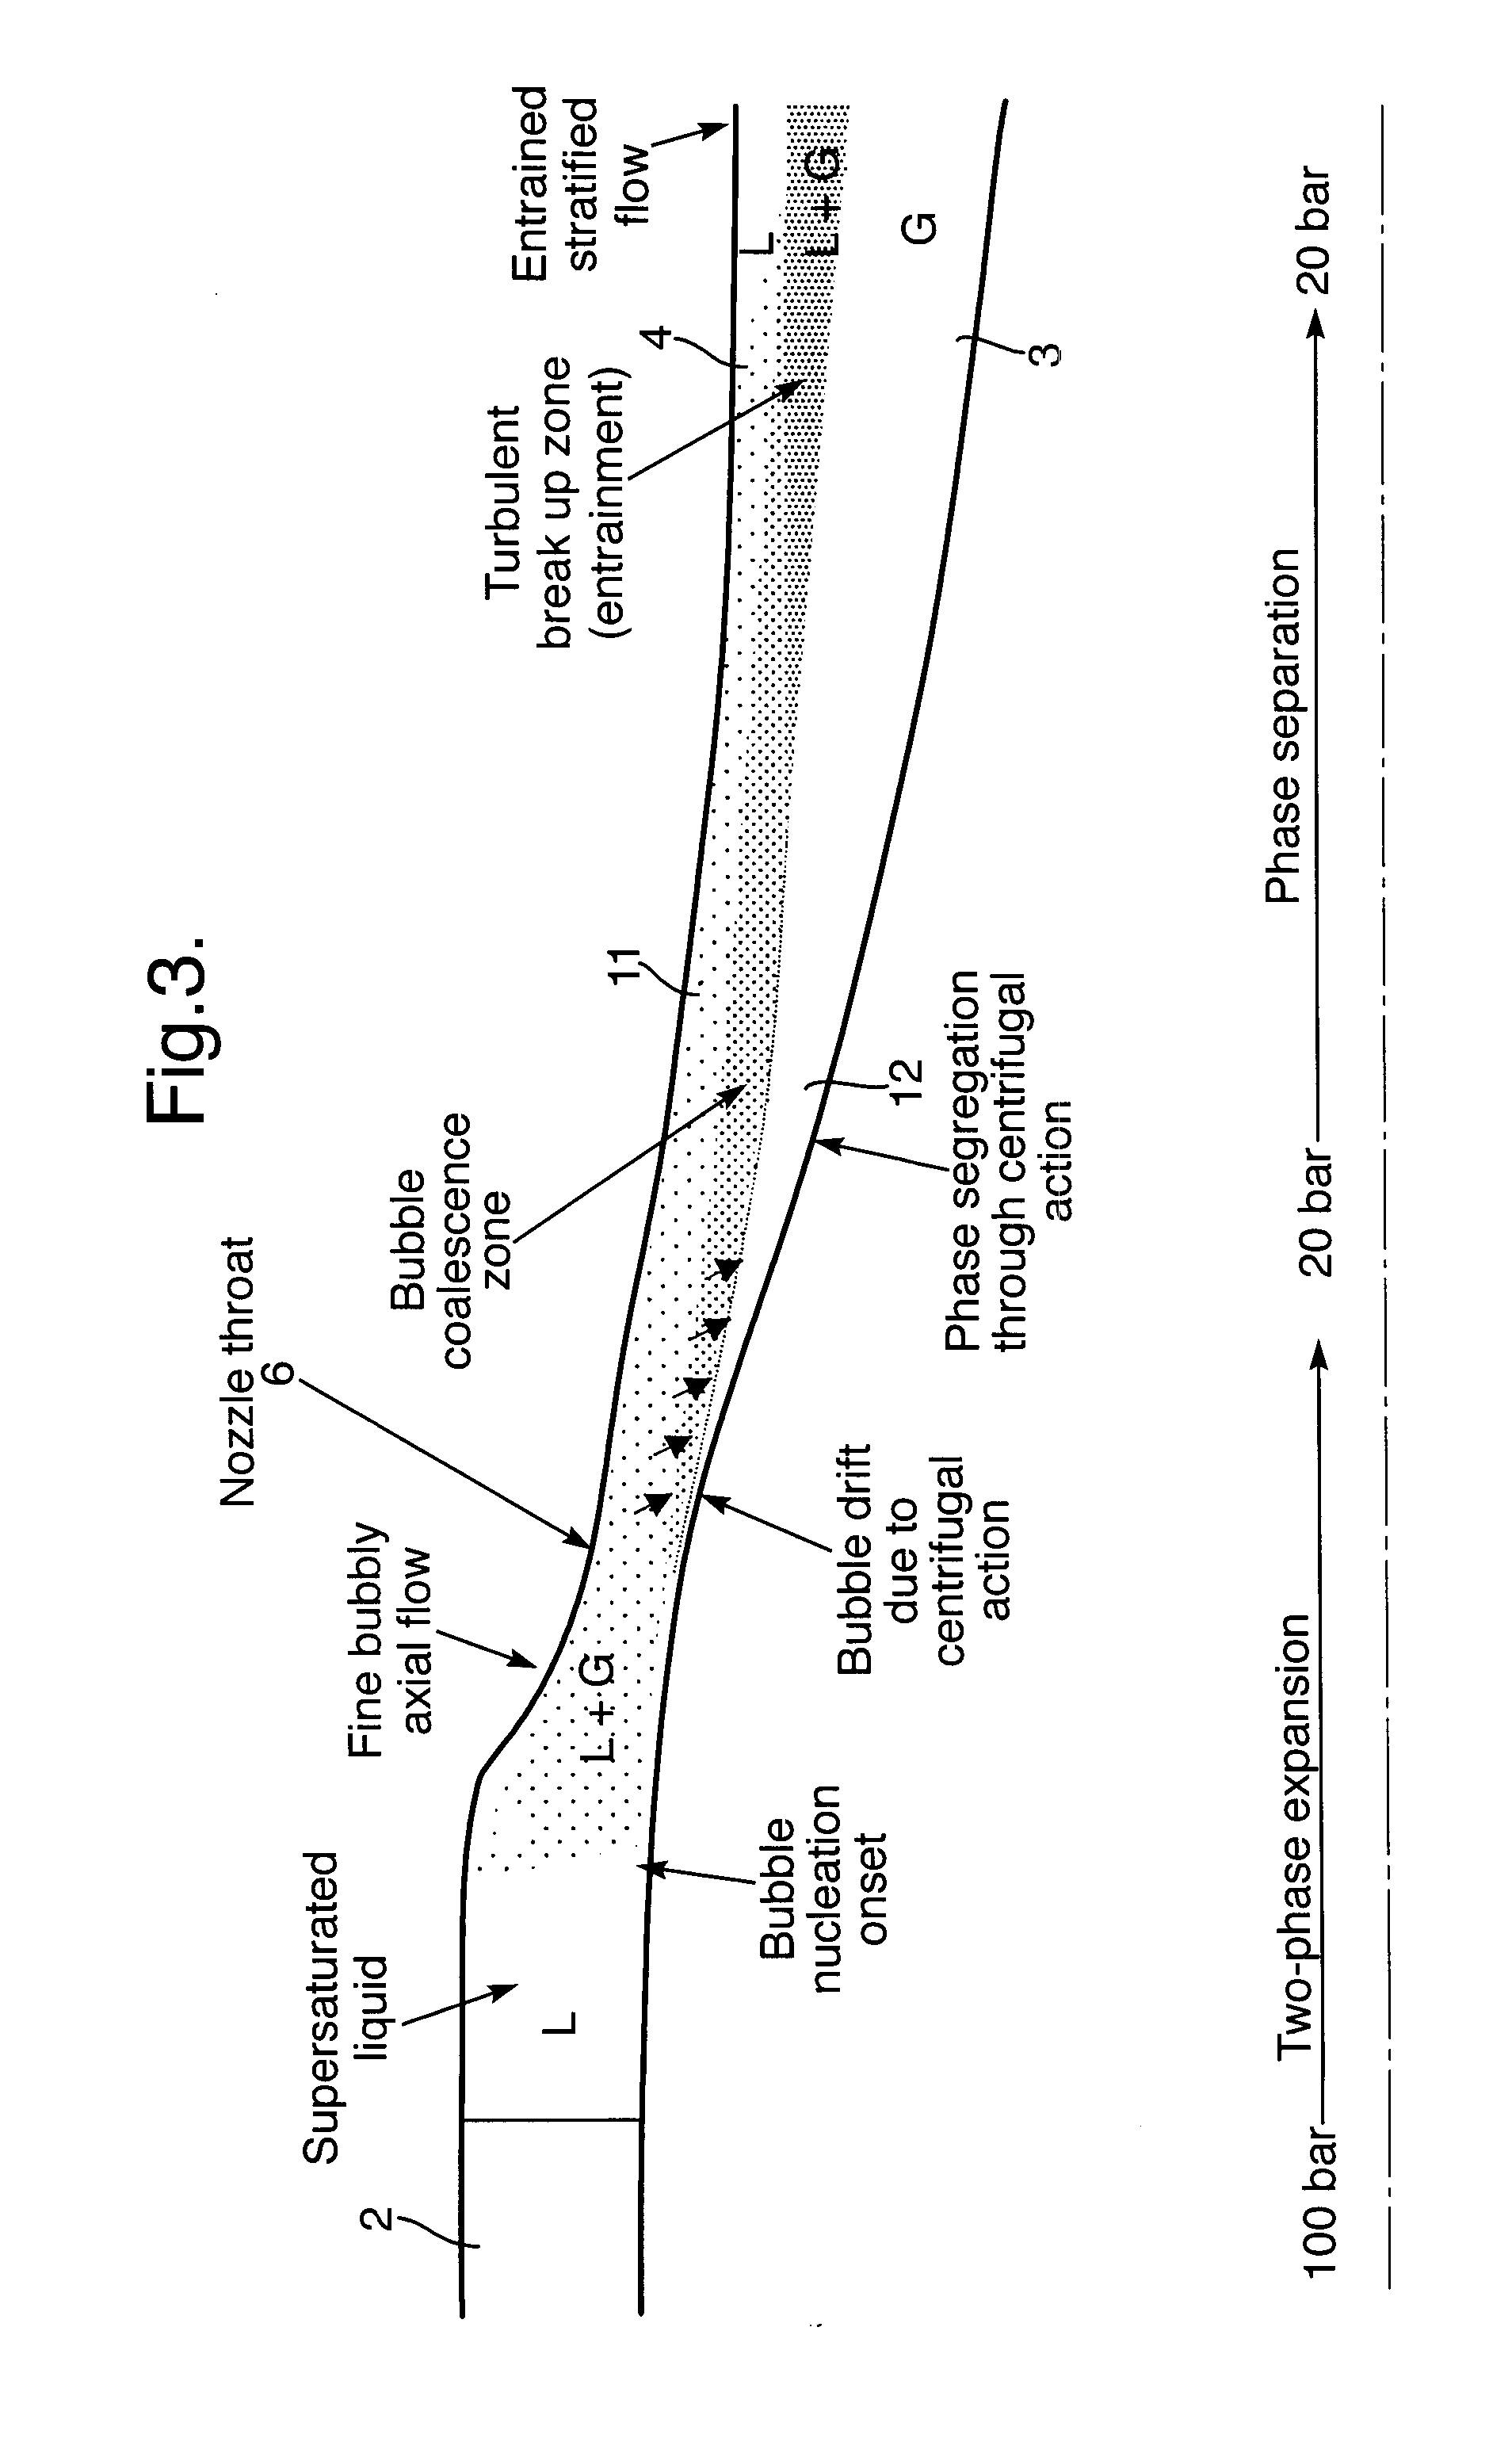 Cyclonic liquid degassing separator and method for degassing a fluid mixture